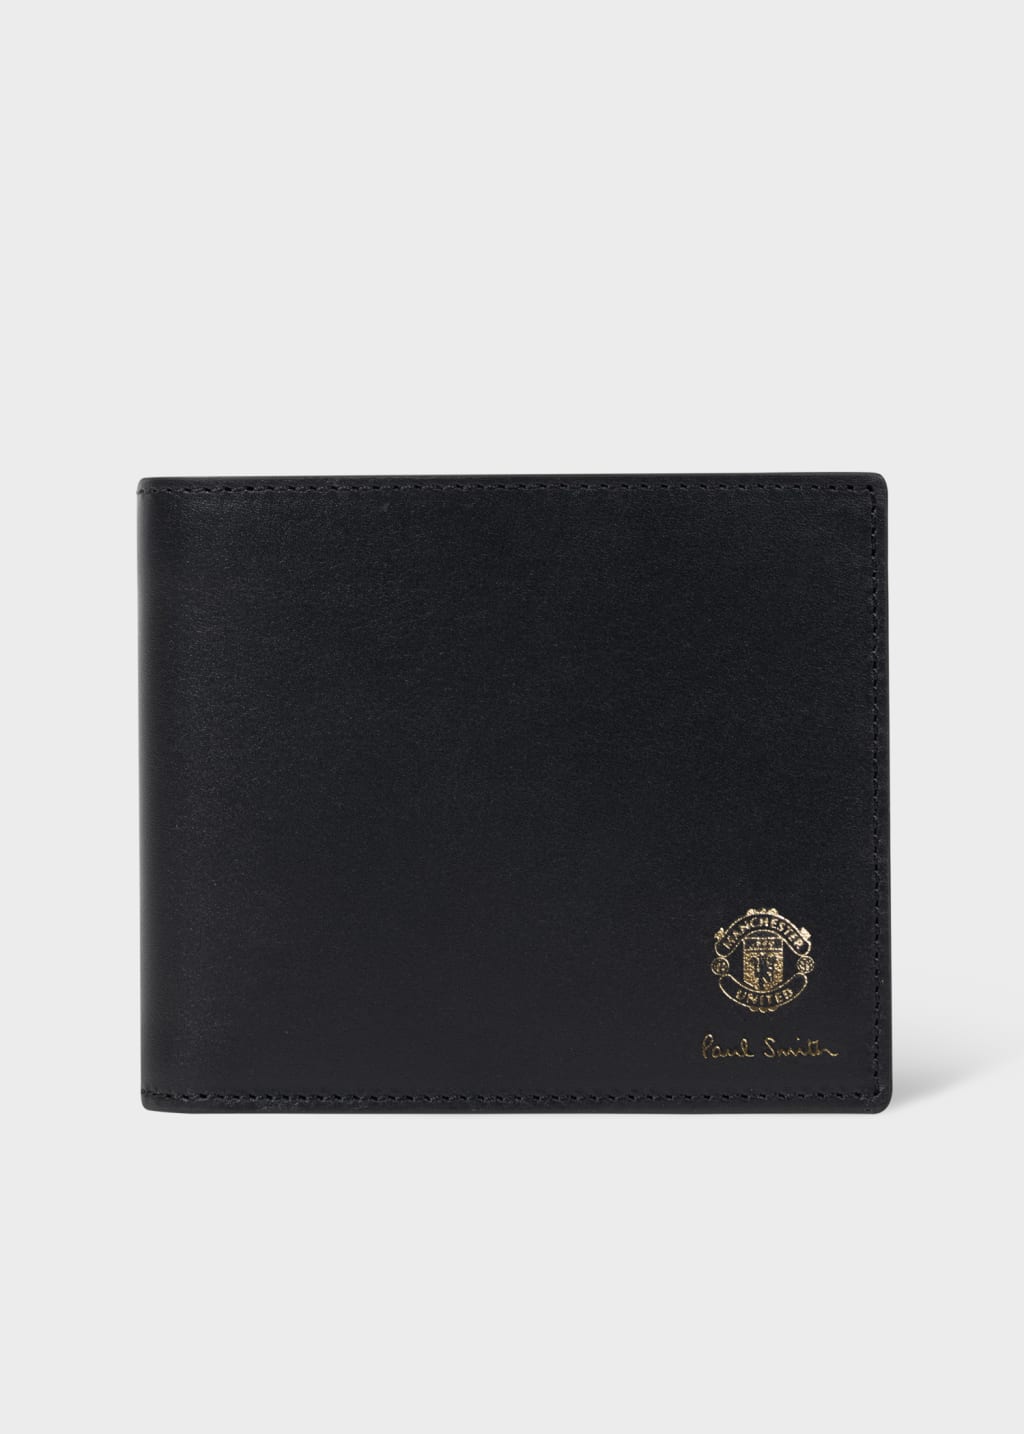 Product View - Paul Smith & Manchester United - Black 'Stadium' Billfold Wallet